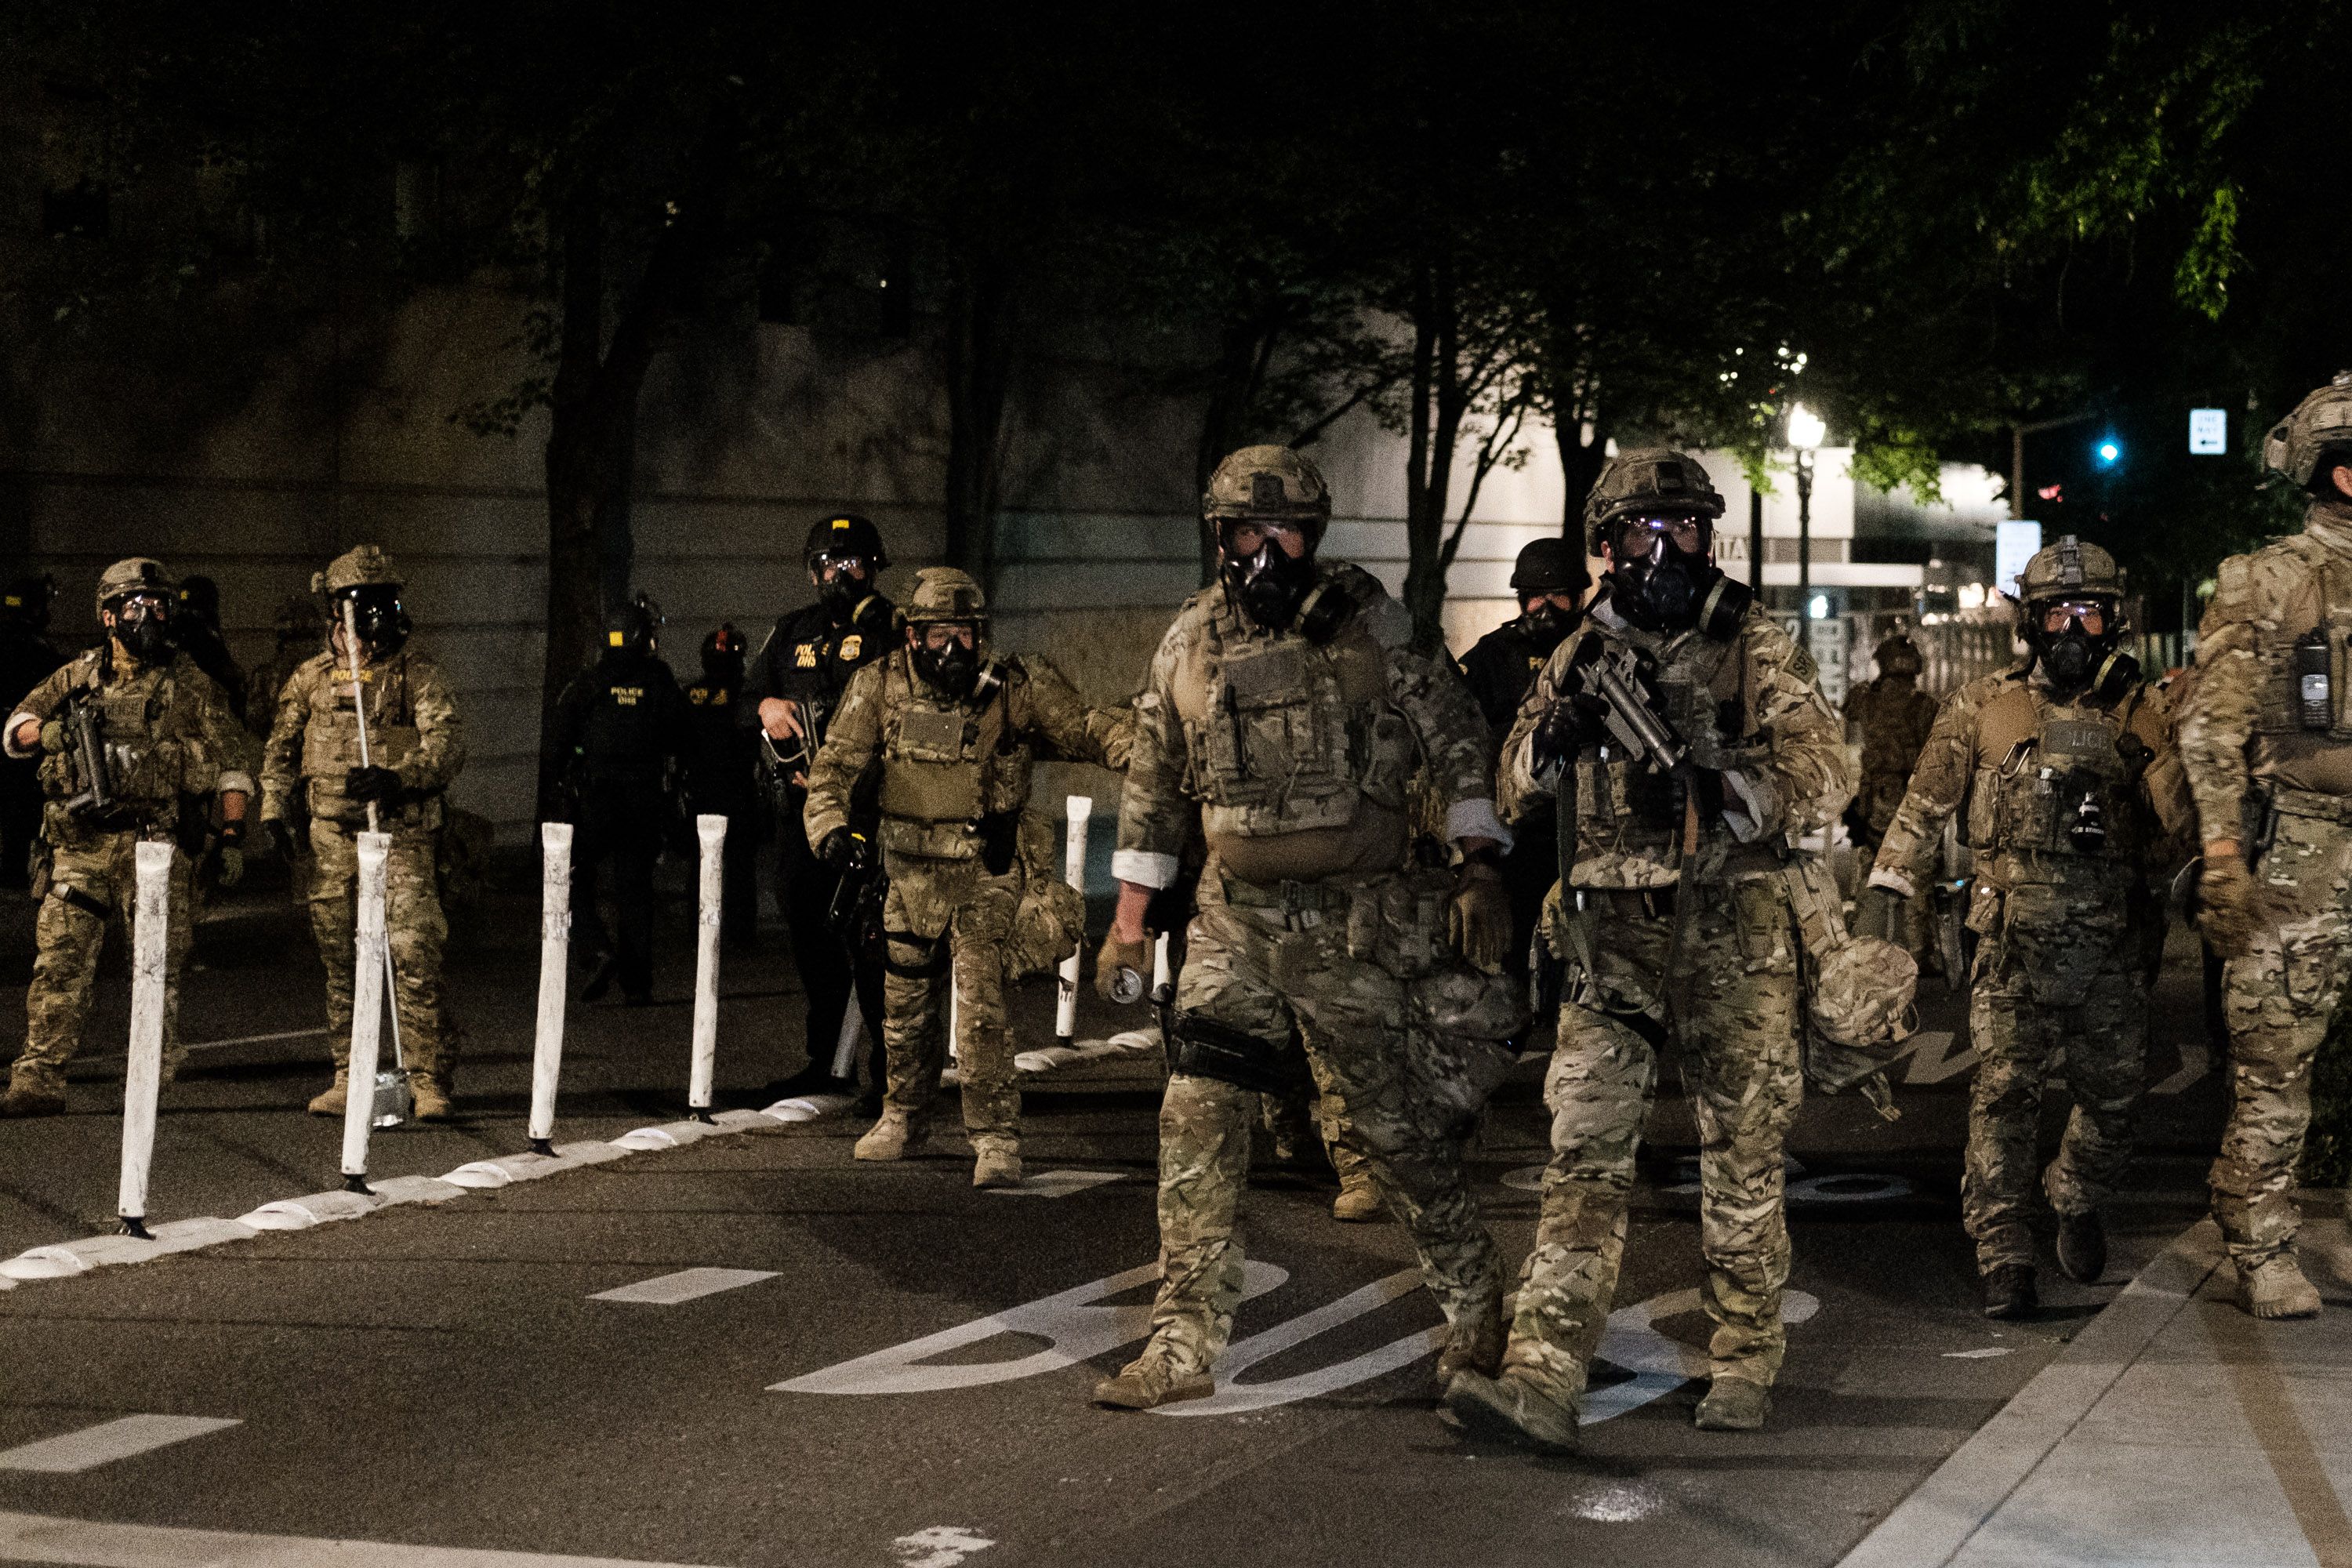 Federal officers preparing to disperse a crowd of protestors. Photo: Mason Trinca/Getty Images